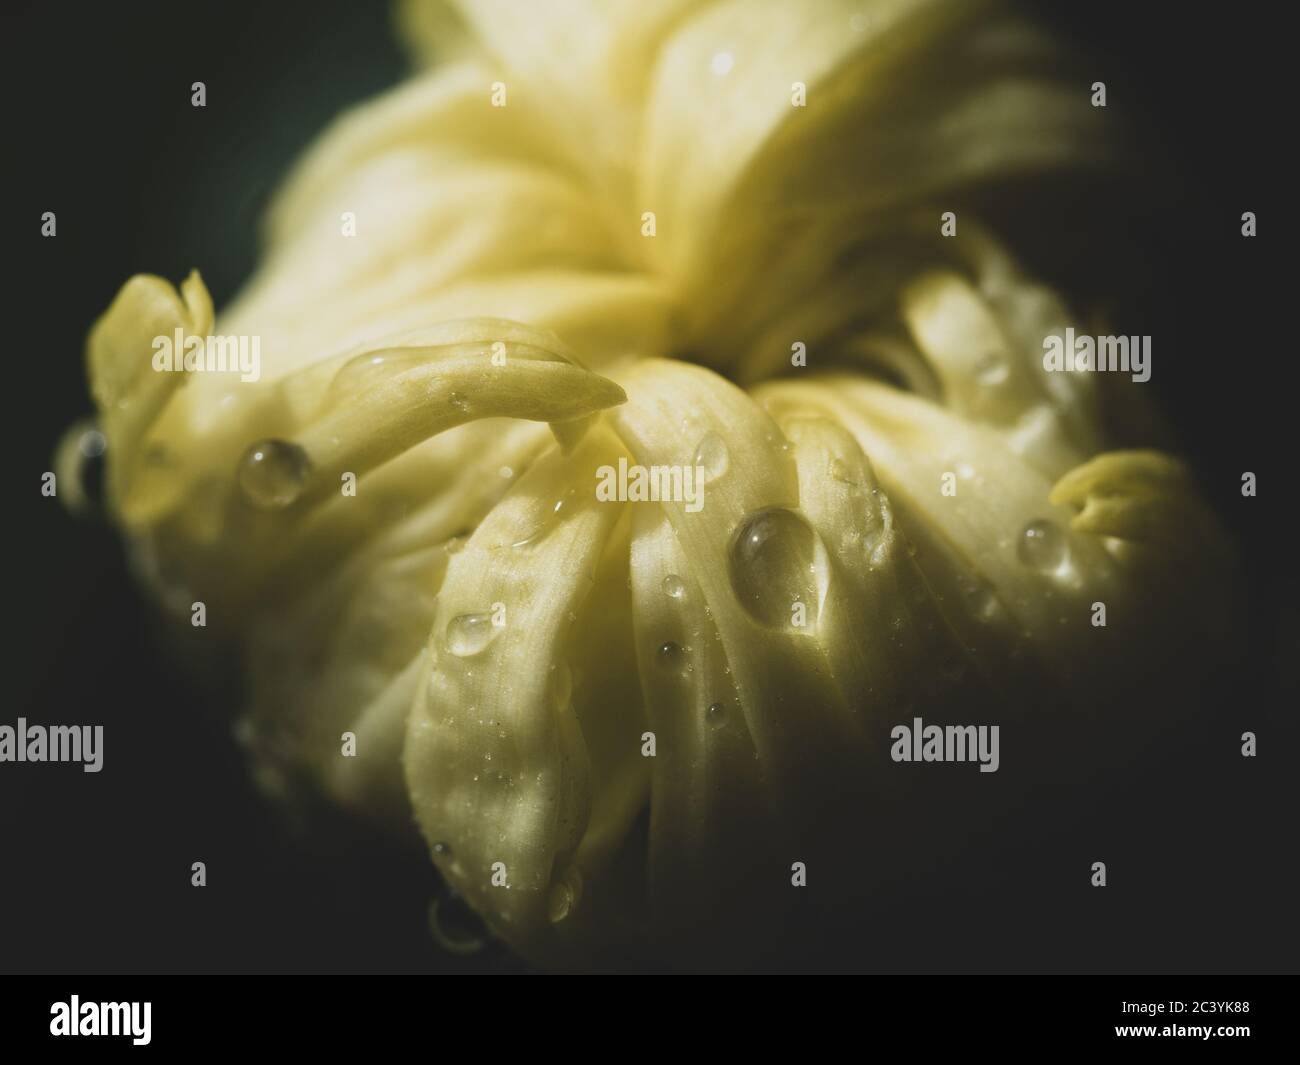 Flower with water drops, Macro shot of a wet yellow Chrysanthemum bud bursting into life, droplets, curled petals, blurred dark black background Stock Photo